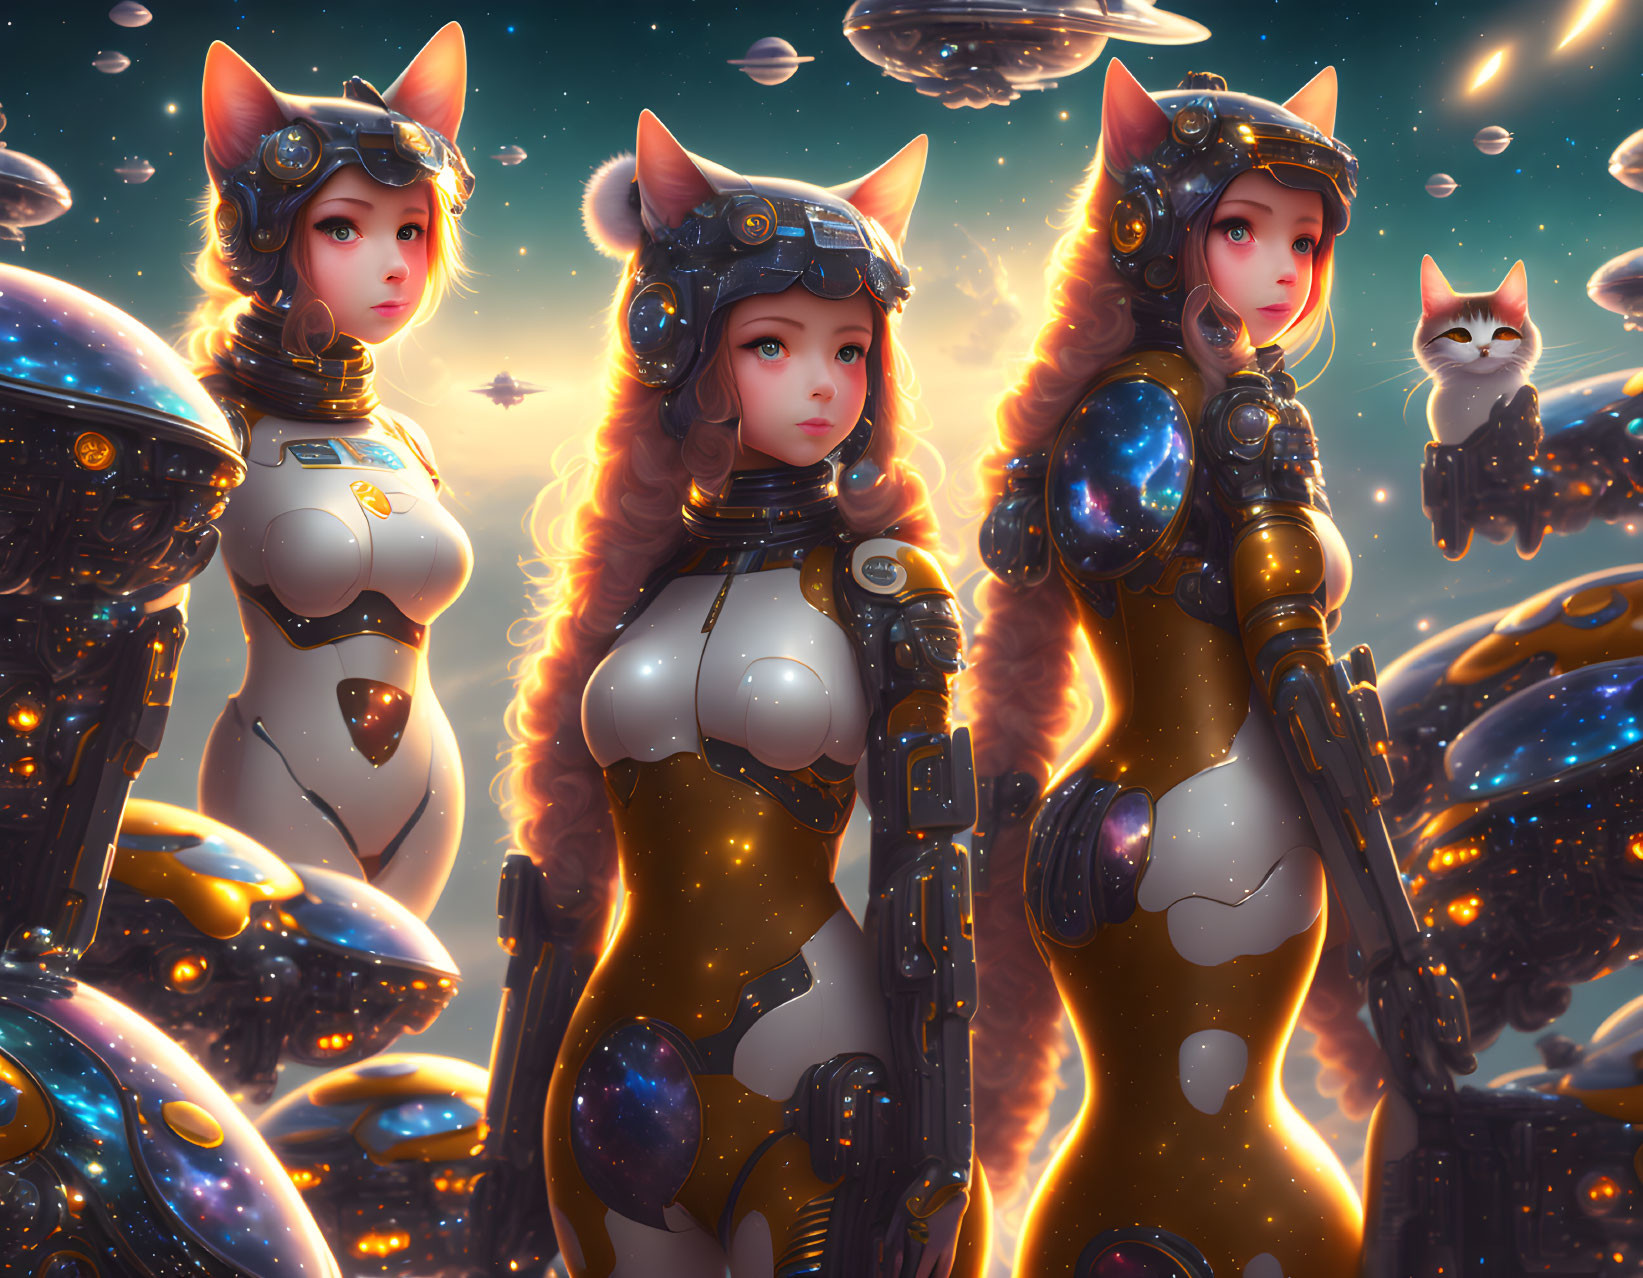 Futuristic female characters with cat-like features in space suits against cosmic background